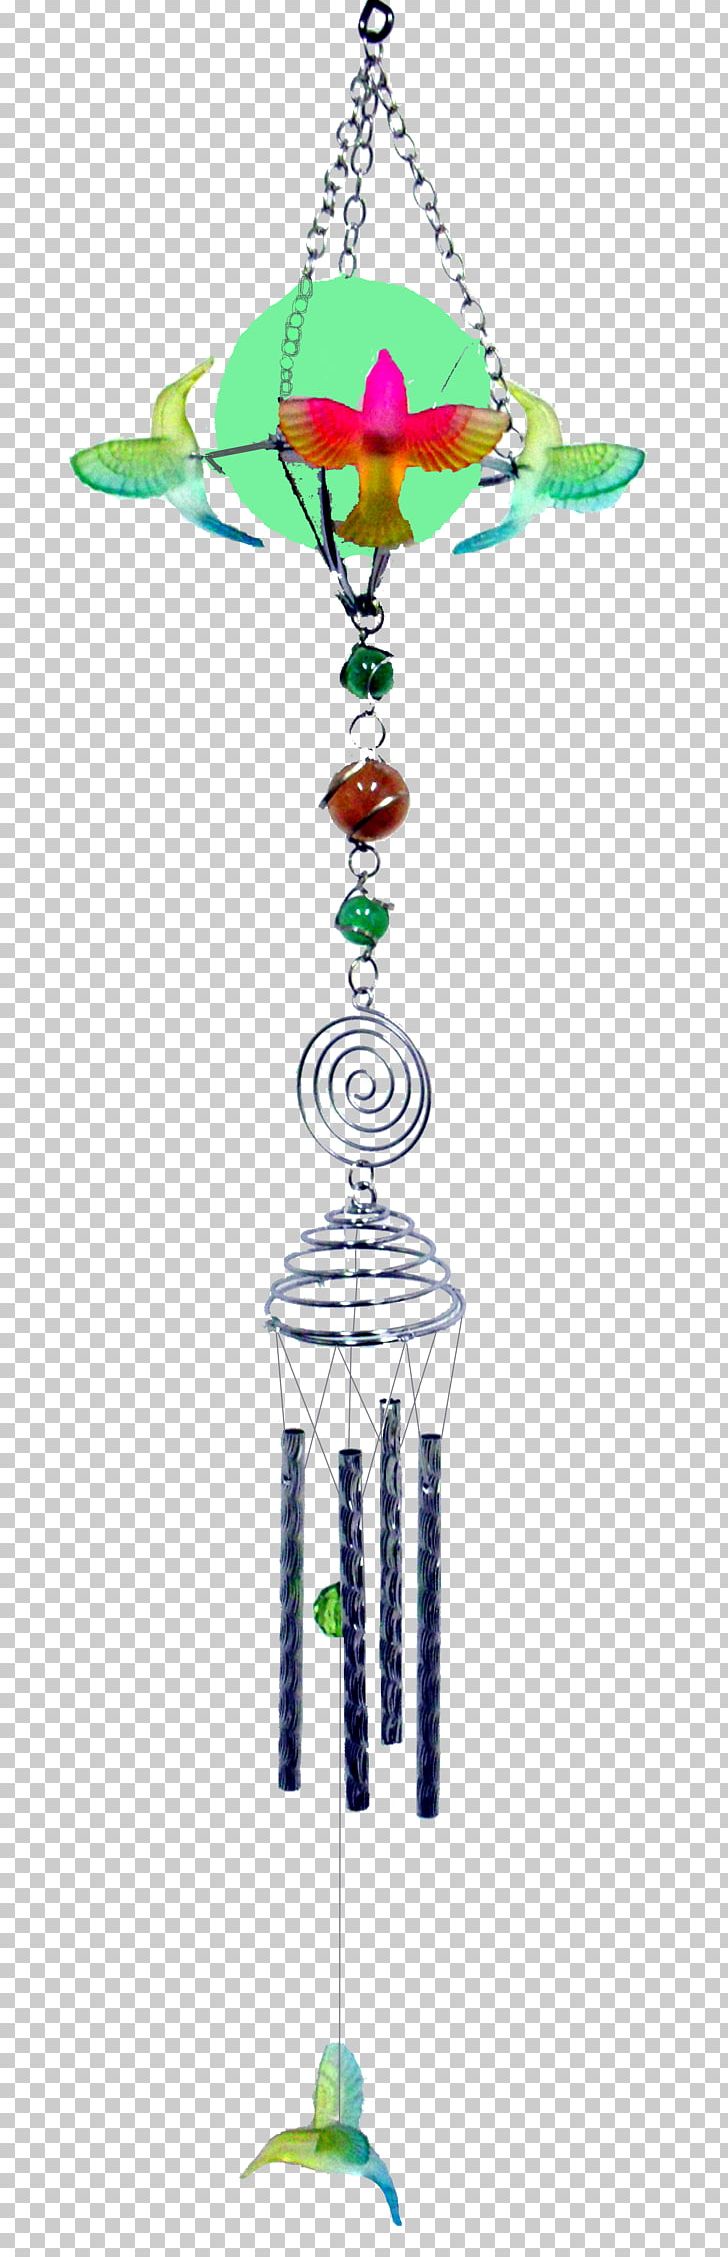 Solar Lamp Solar Power Light-emitting Diode Acrylic Paint Light Fixture PNG, Clipart, Acrylic, Acrylic, Bird, Chime, Christmas Free PNG Download